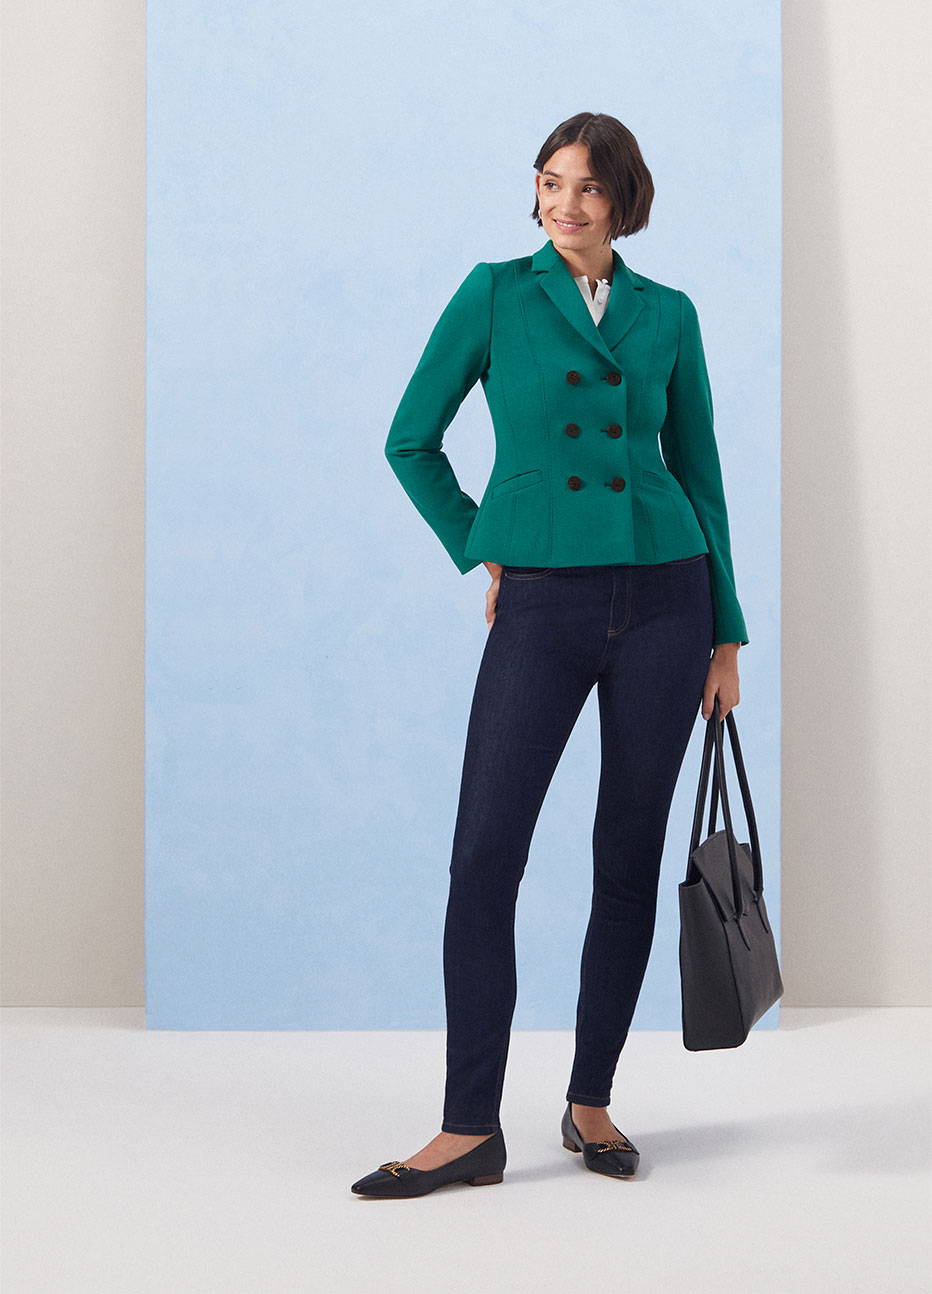 Model photographed against a blue backdrop wearing a Hobbs tailored jacket, white blouse and indigo jeans.